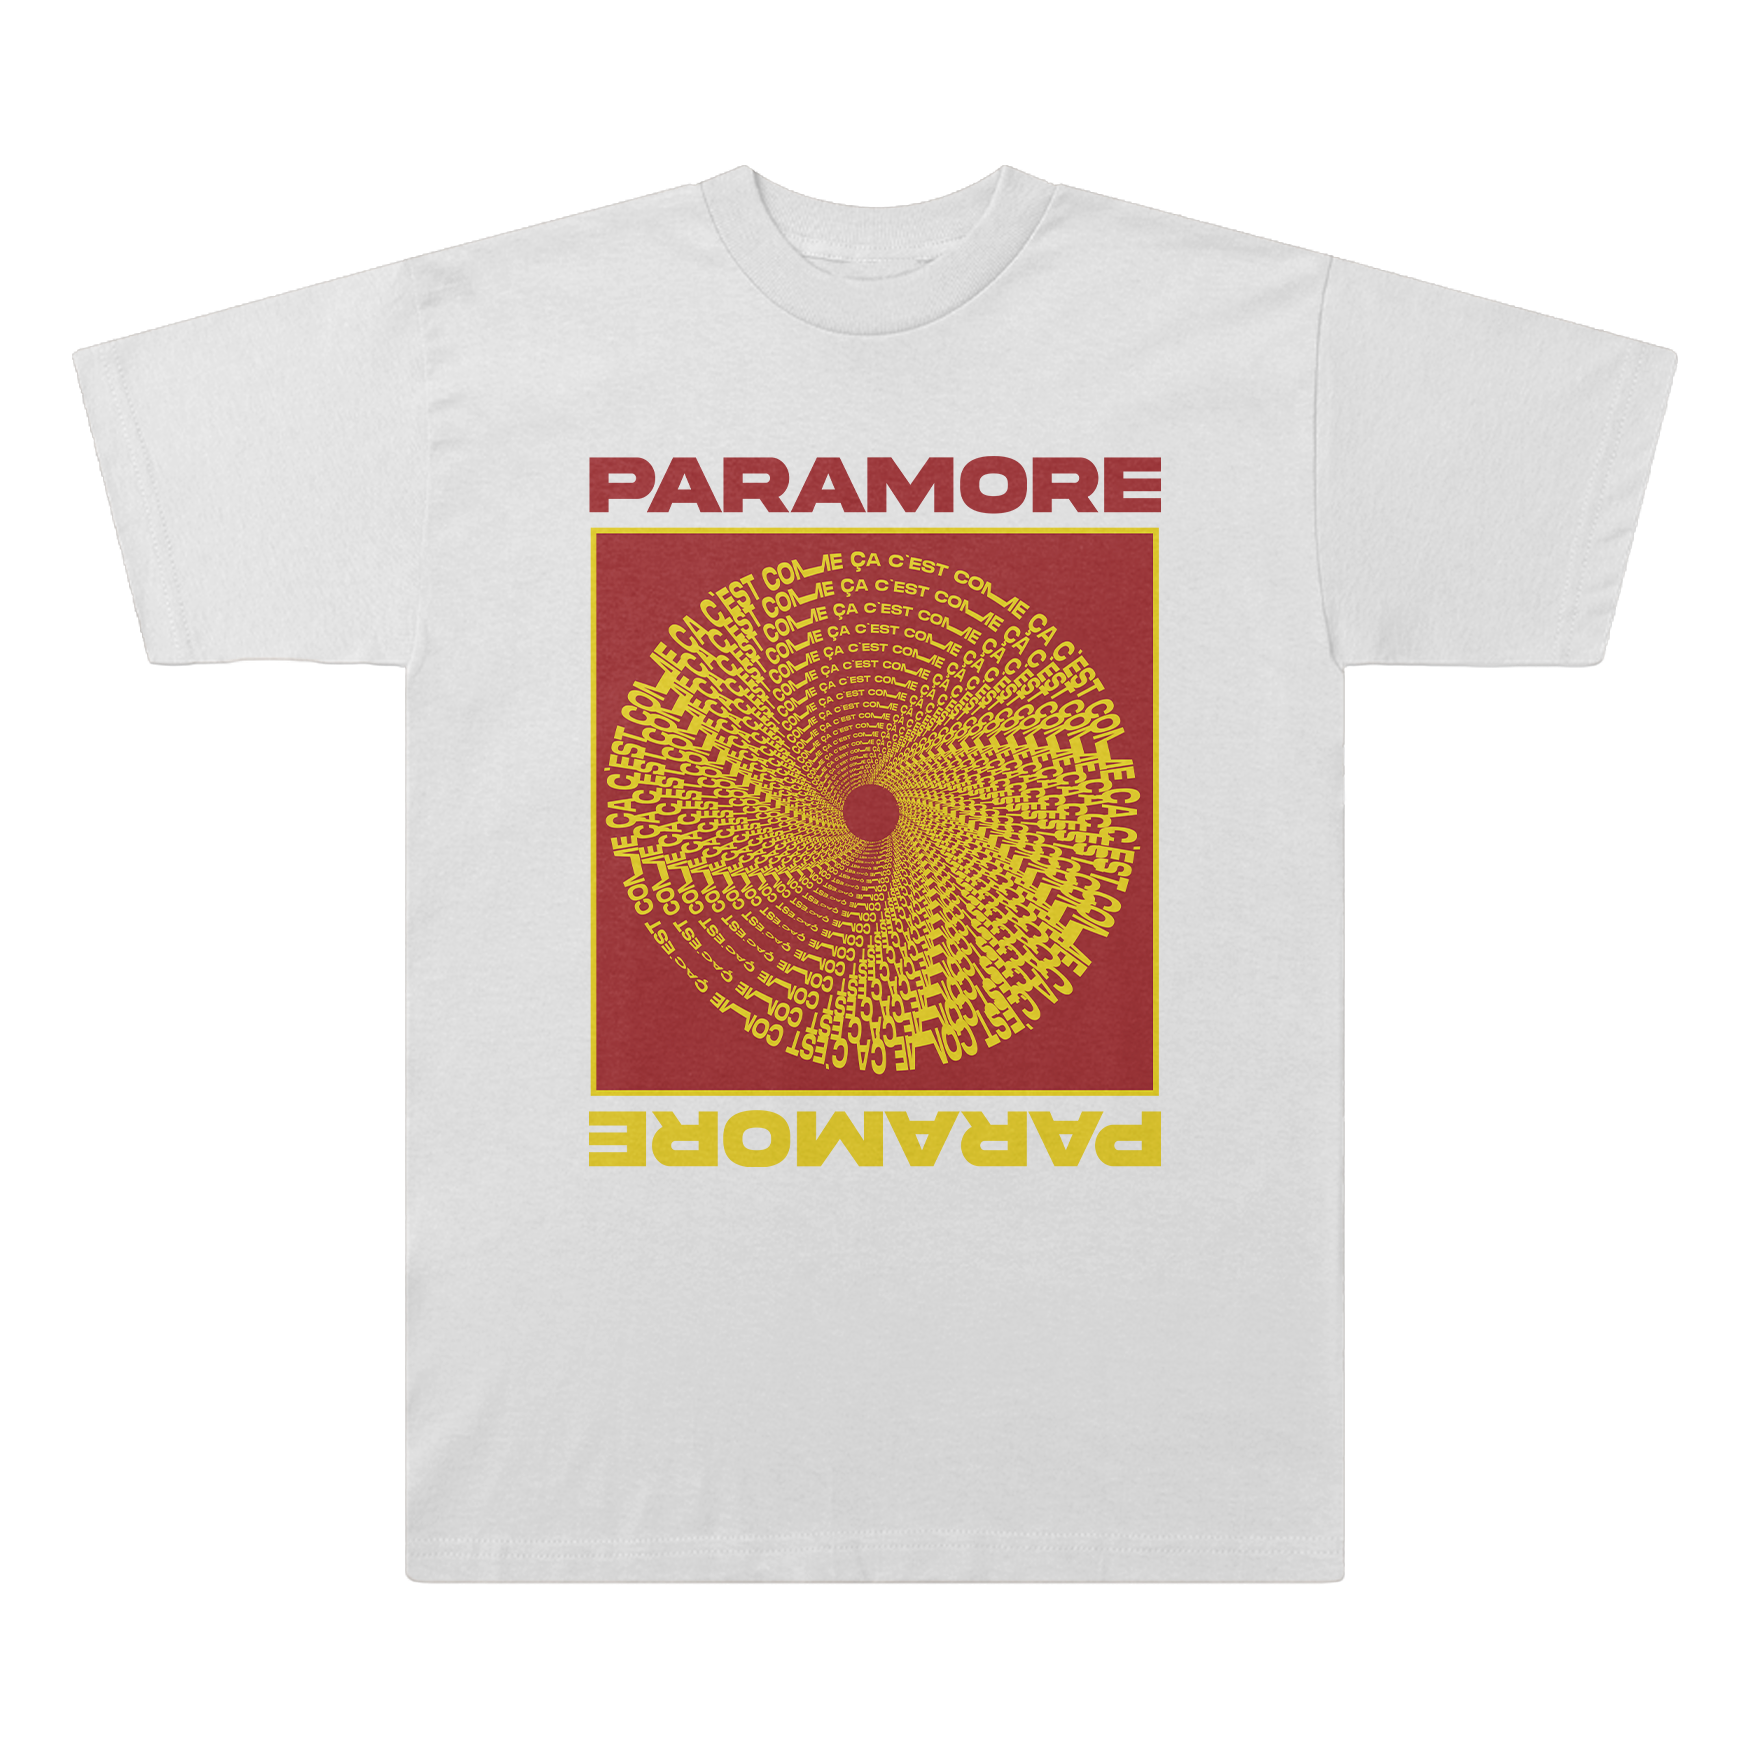 Running Out Of Time Paramore Shirt 611365 0 - teejeep